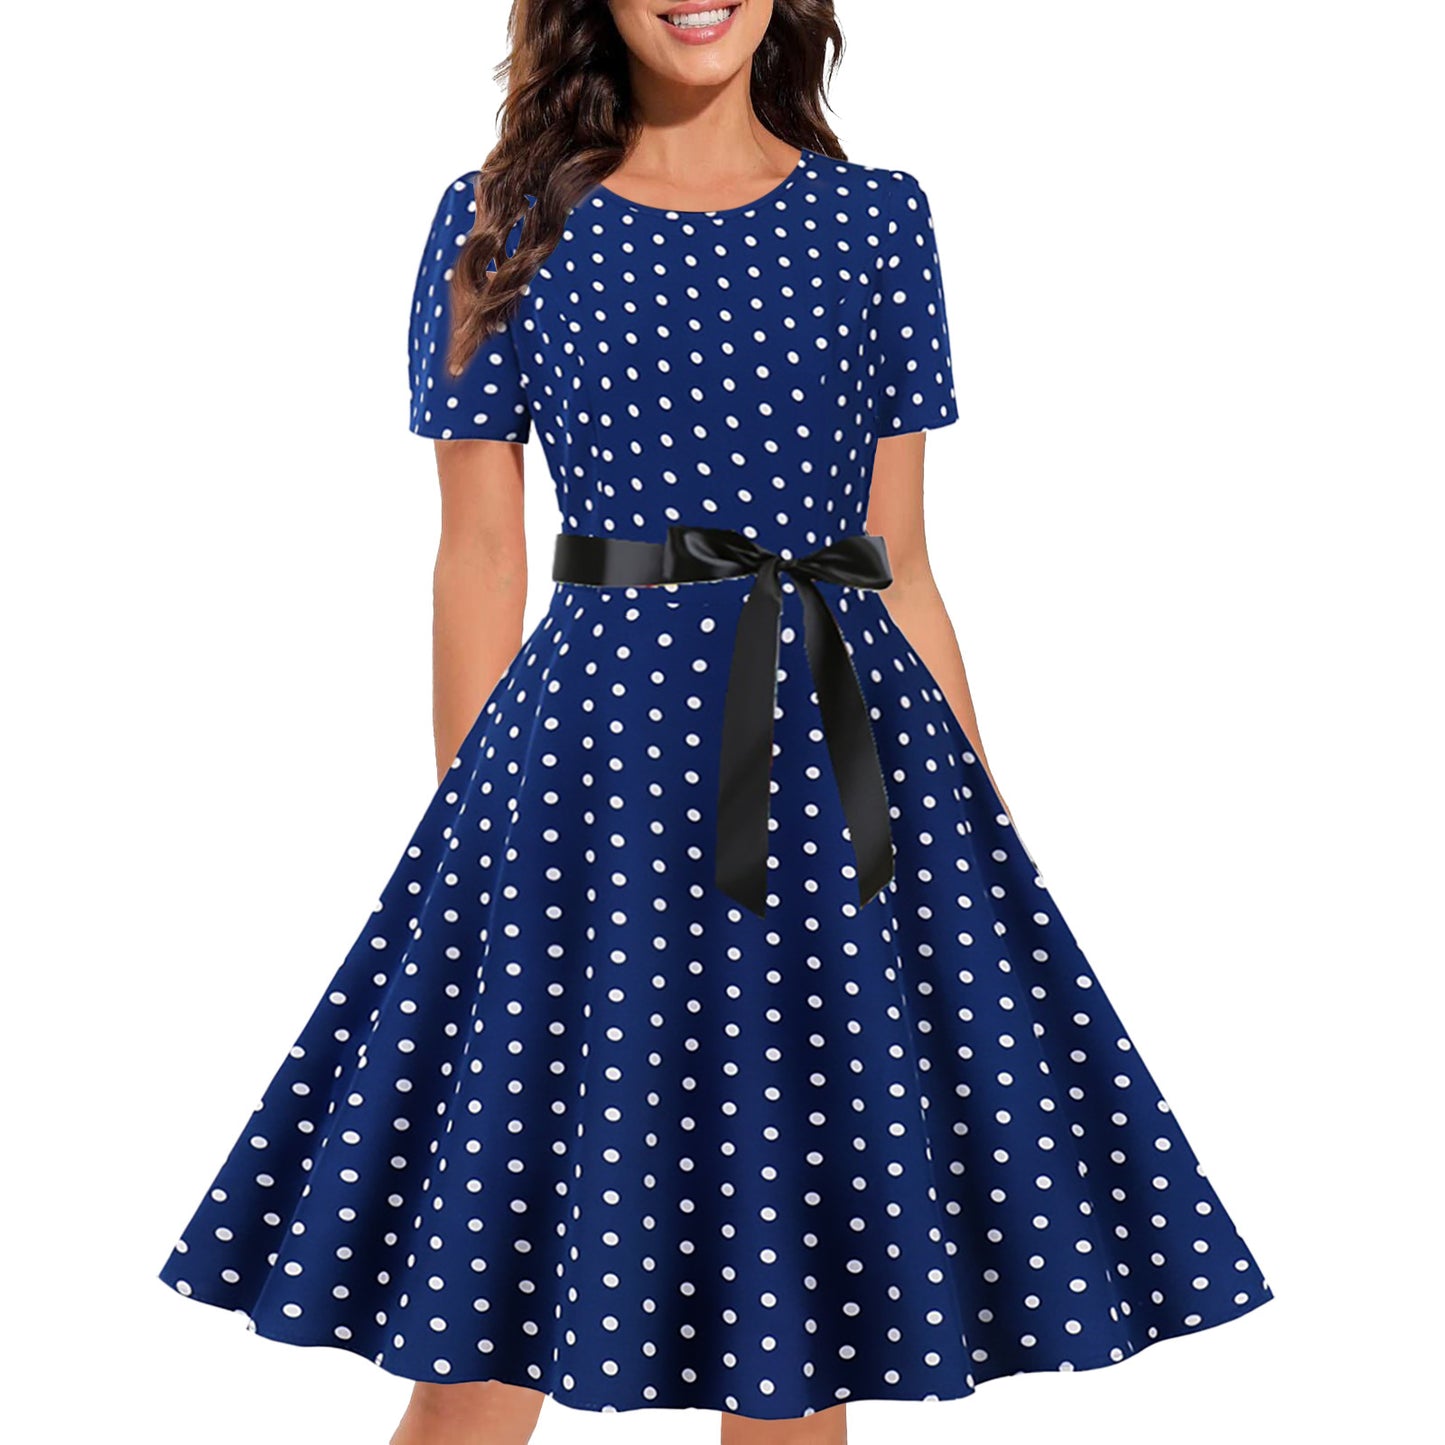 Women's Graceful and Fashionable Round Neck Slimming Polka Dot Floral Dress